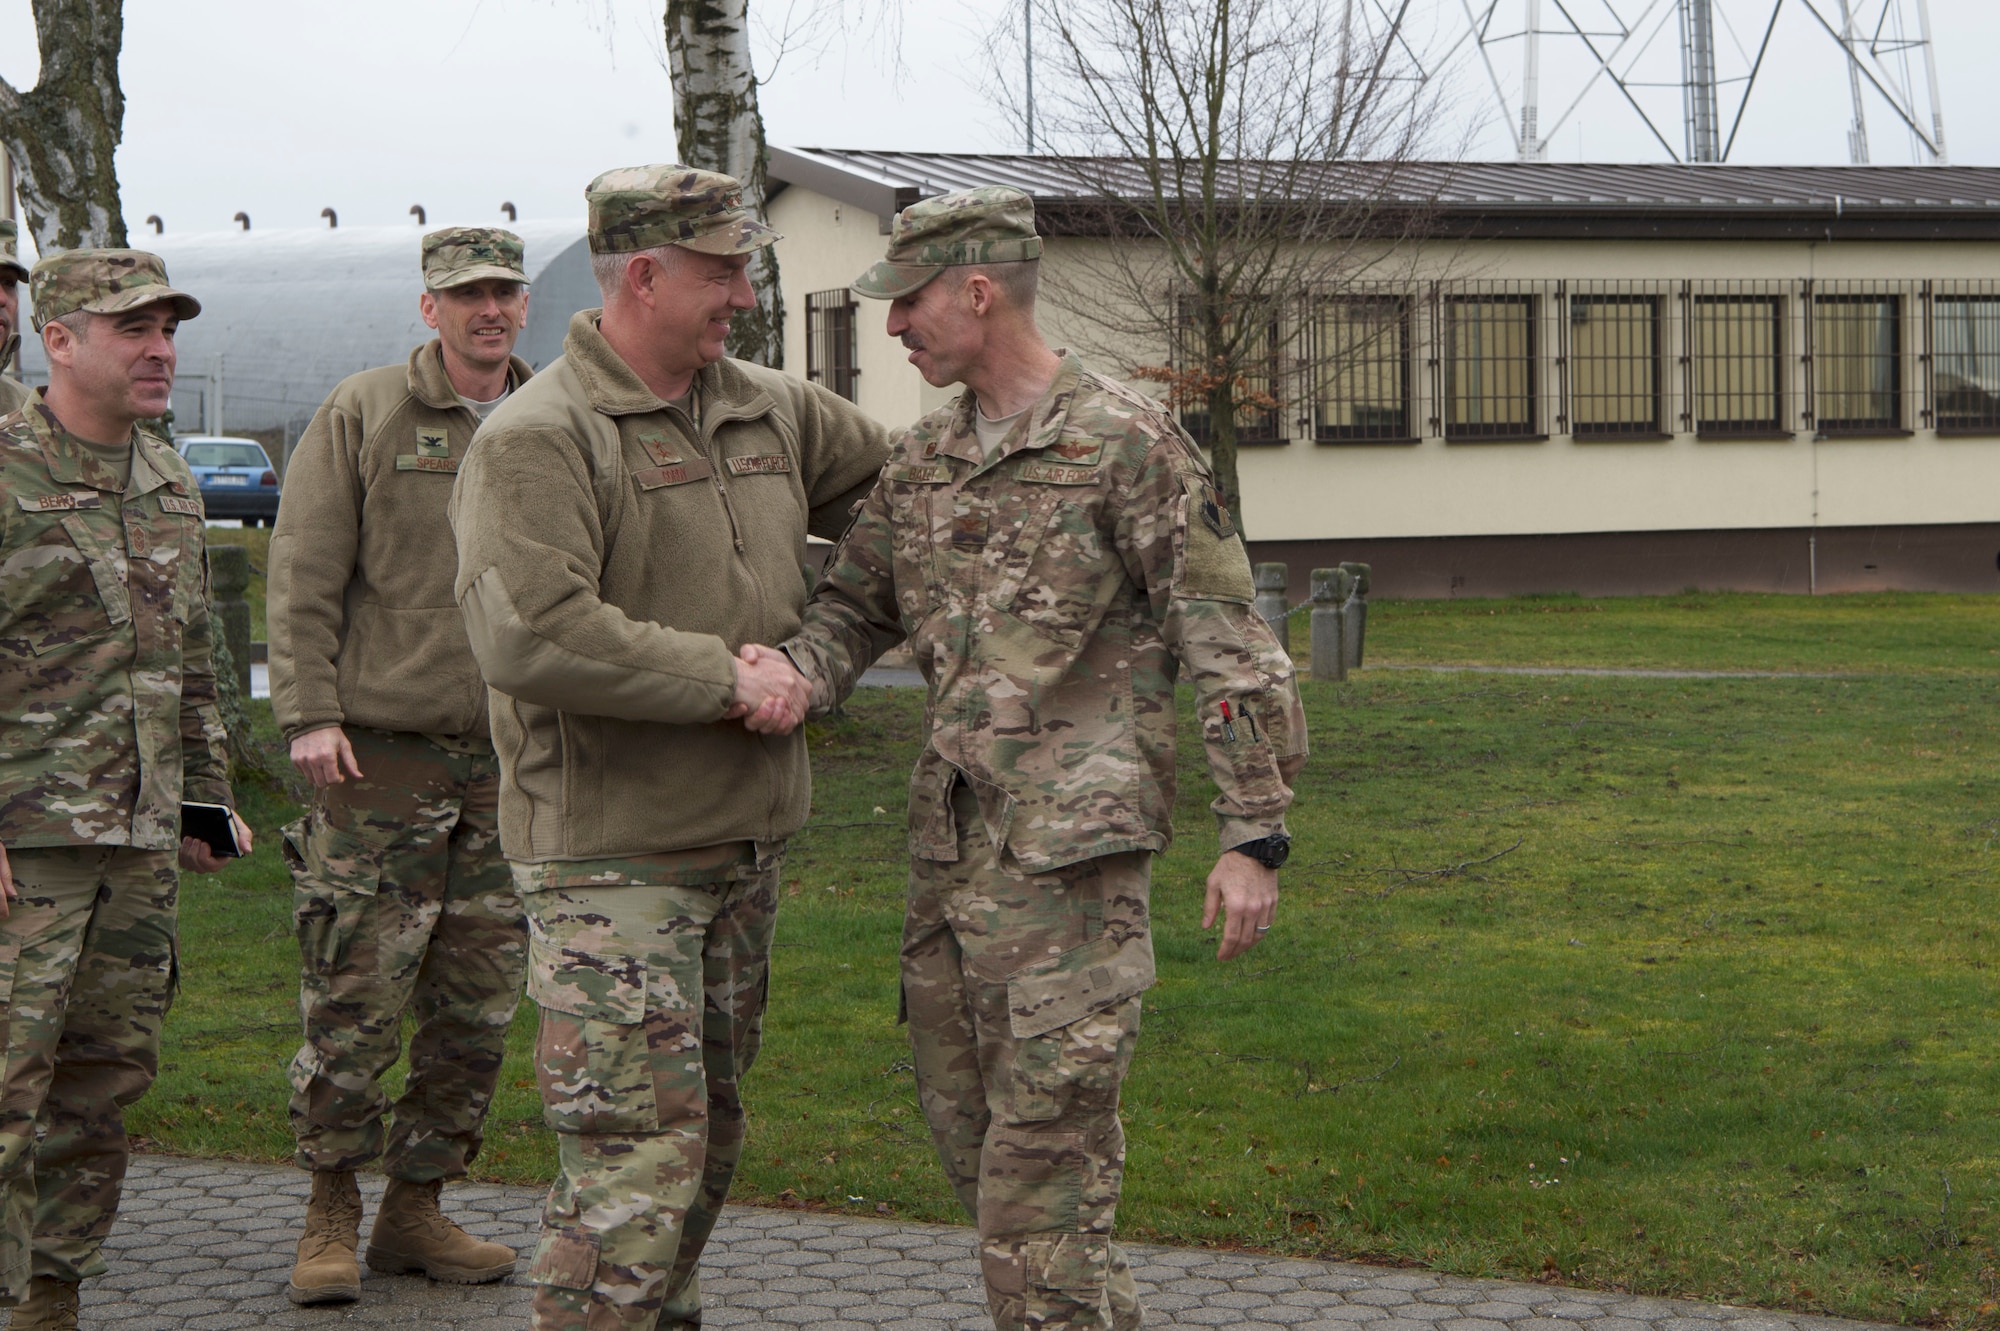 Gordy visited Spangdahlem to discuss the base mission and goals for the upcoming year